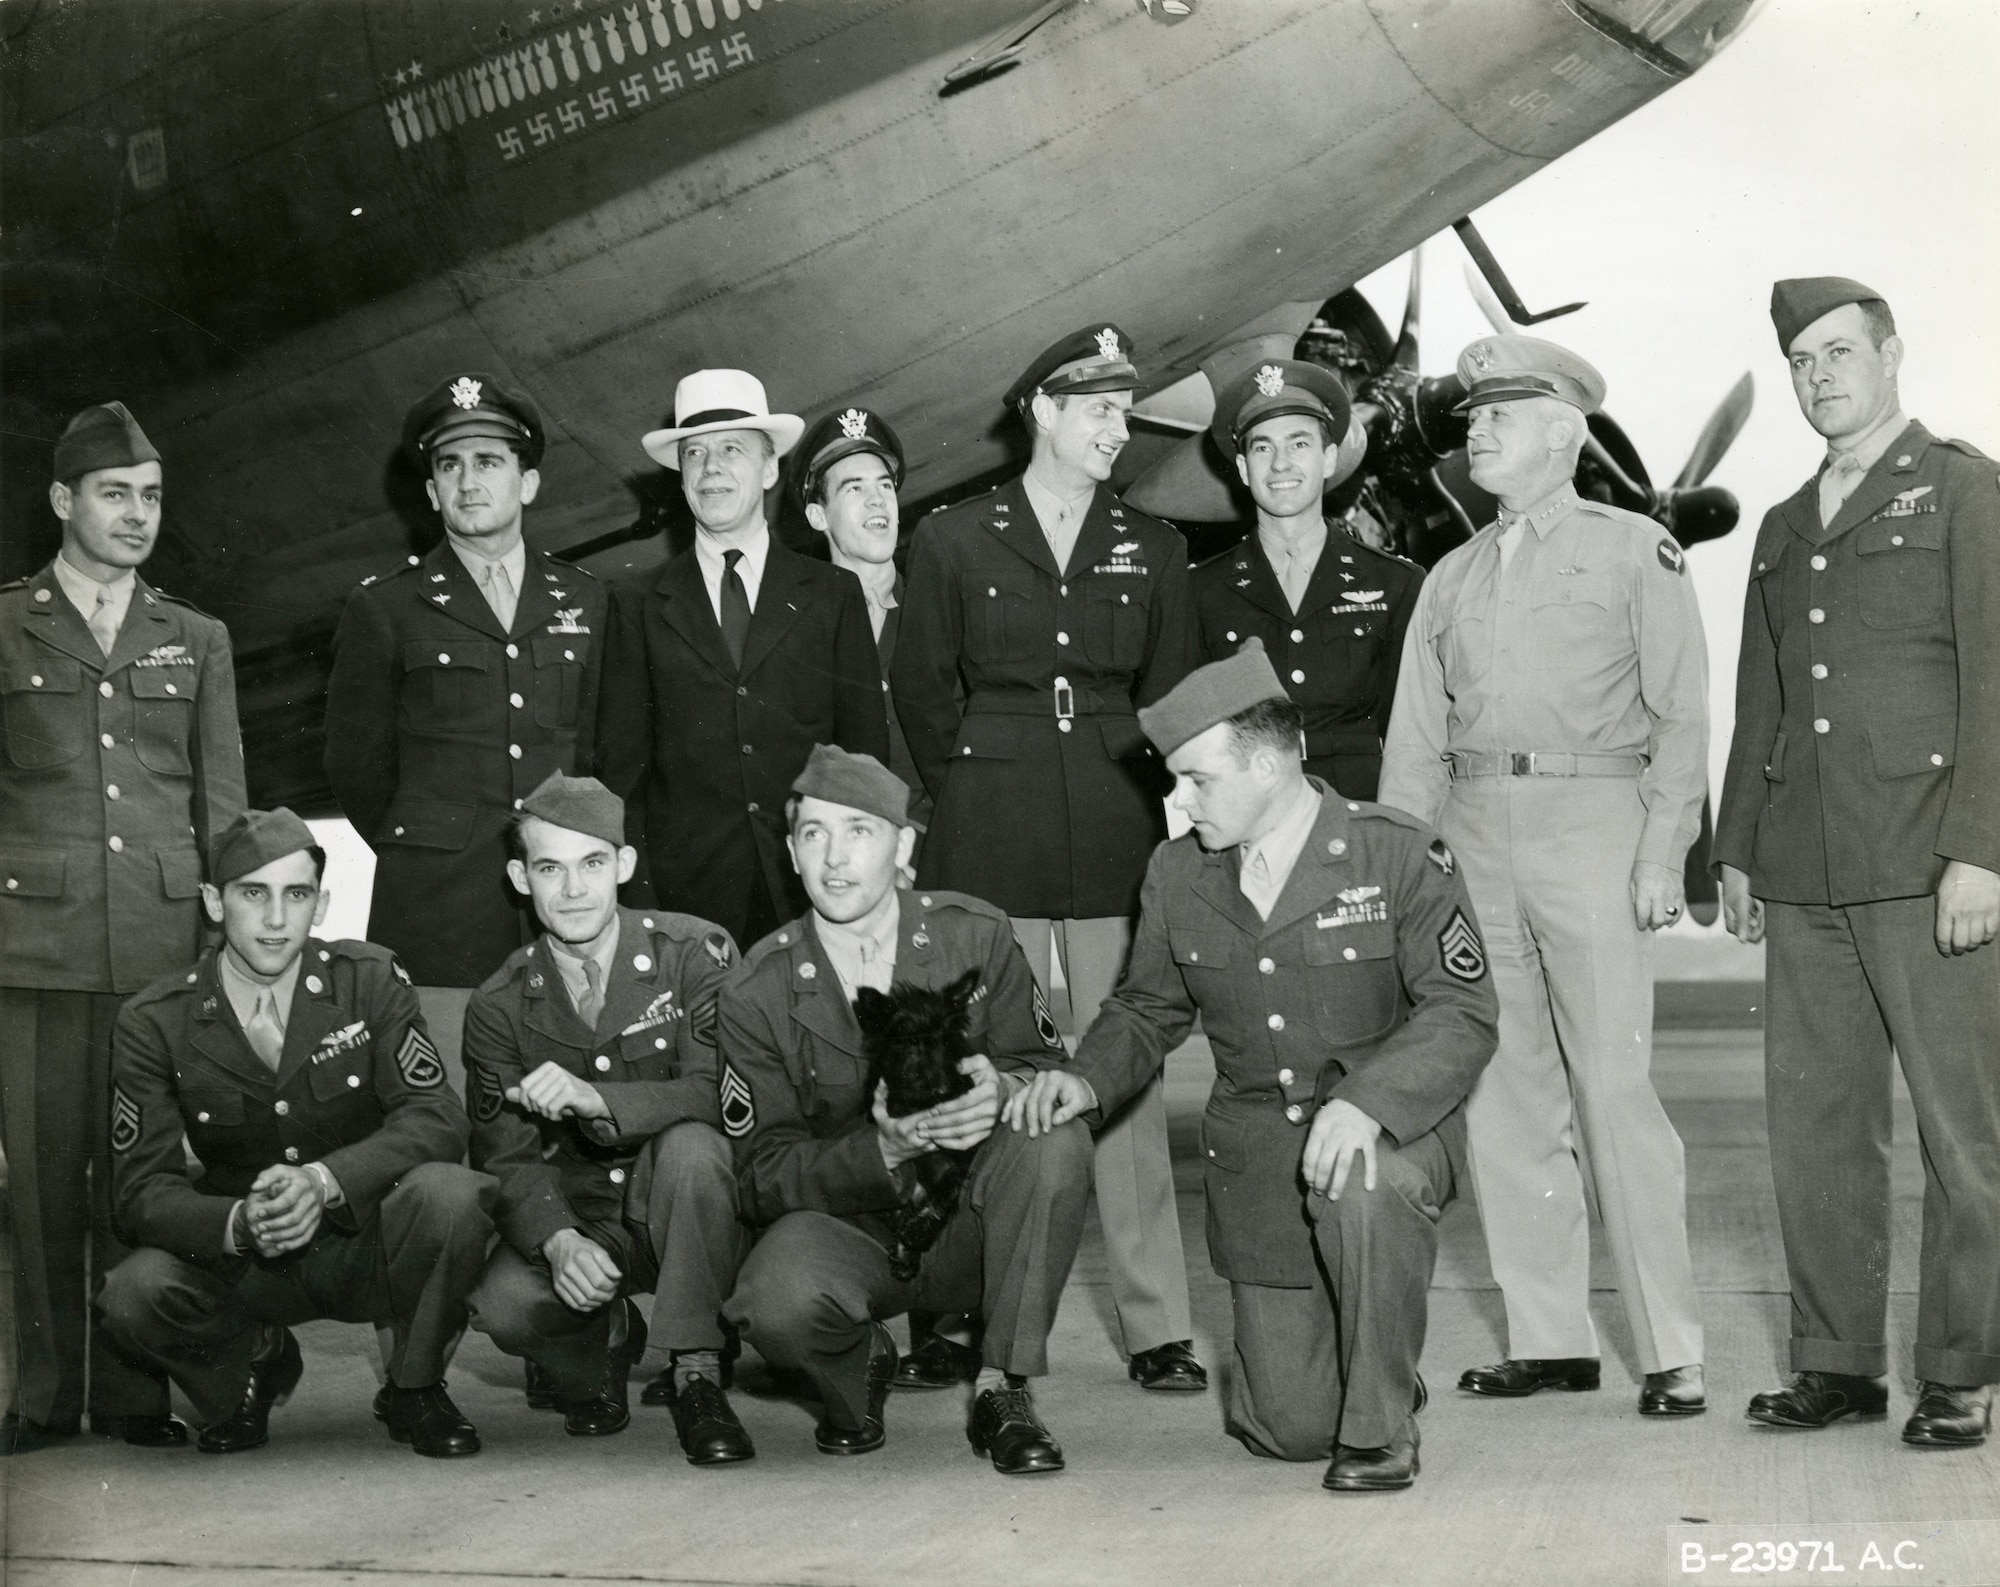 Memphis Belle crew at their first stop on the war bond tour, Washington, DC, on June 16, 1943.  Commanding General of the USAAF Henry “Hap” Arnold (standing, second from the right) and Undersecretary of War Robert Patterson (standing, third from left) are pictured with them.